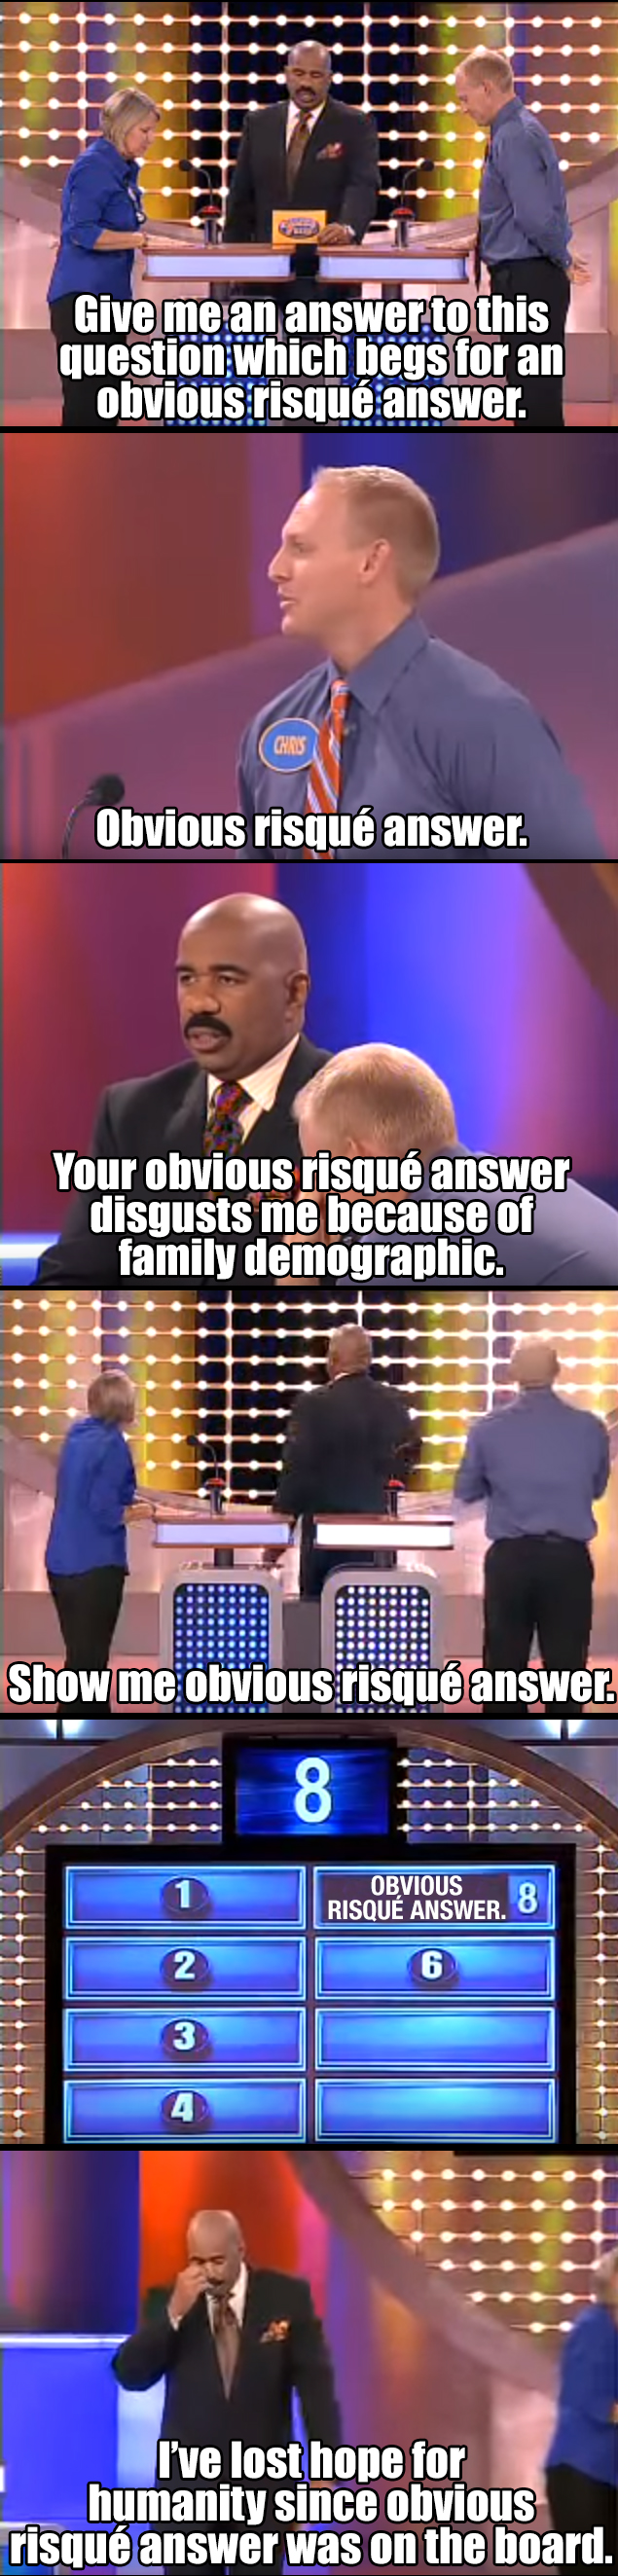 Family Feud. Lather, rinse, repeat.